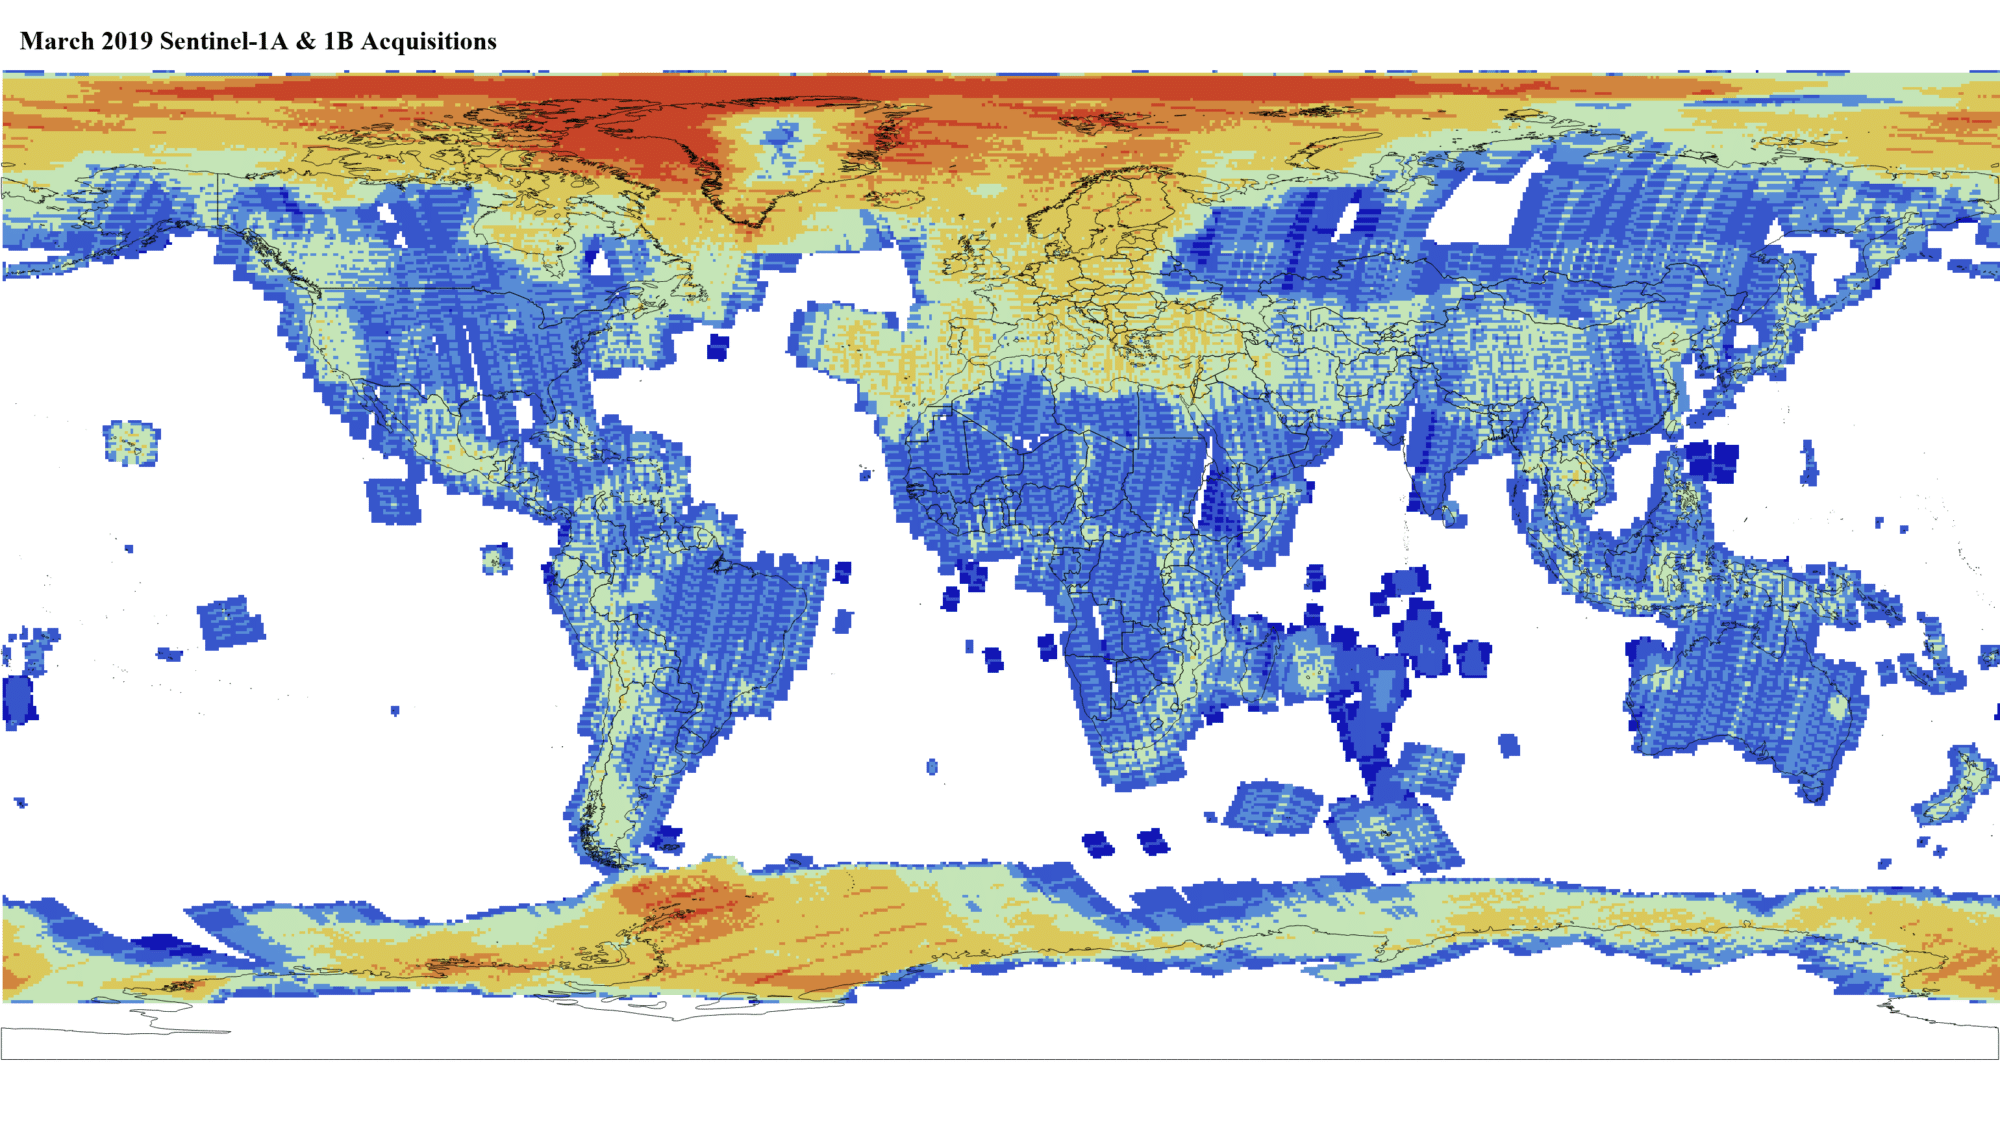 Heat map of Sentinel-1A and -1B GRD global acquisitions March 2019